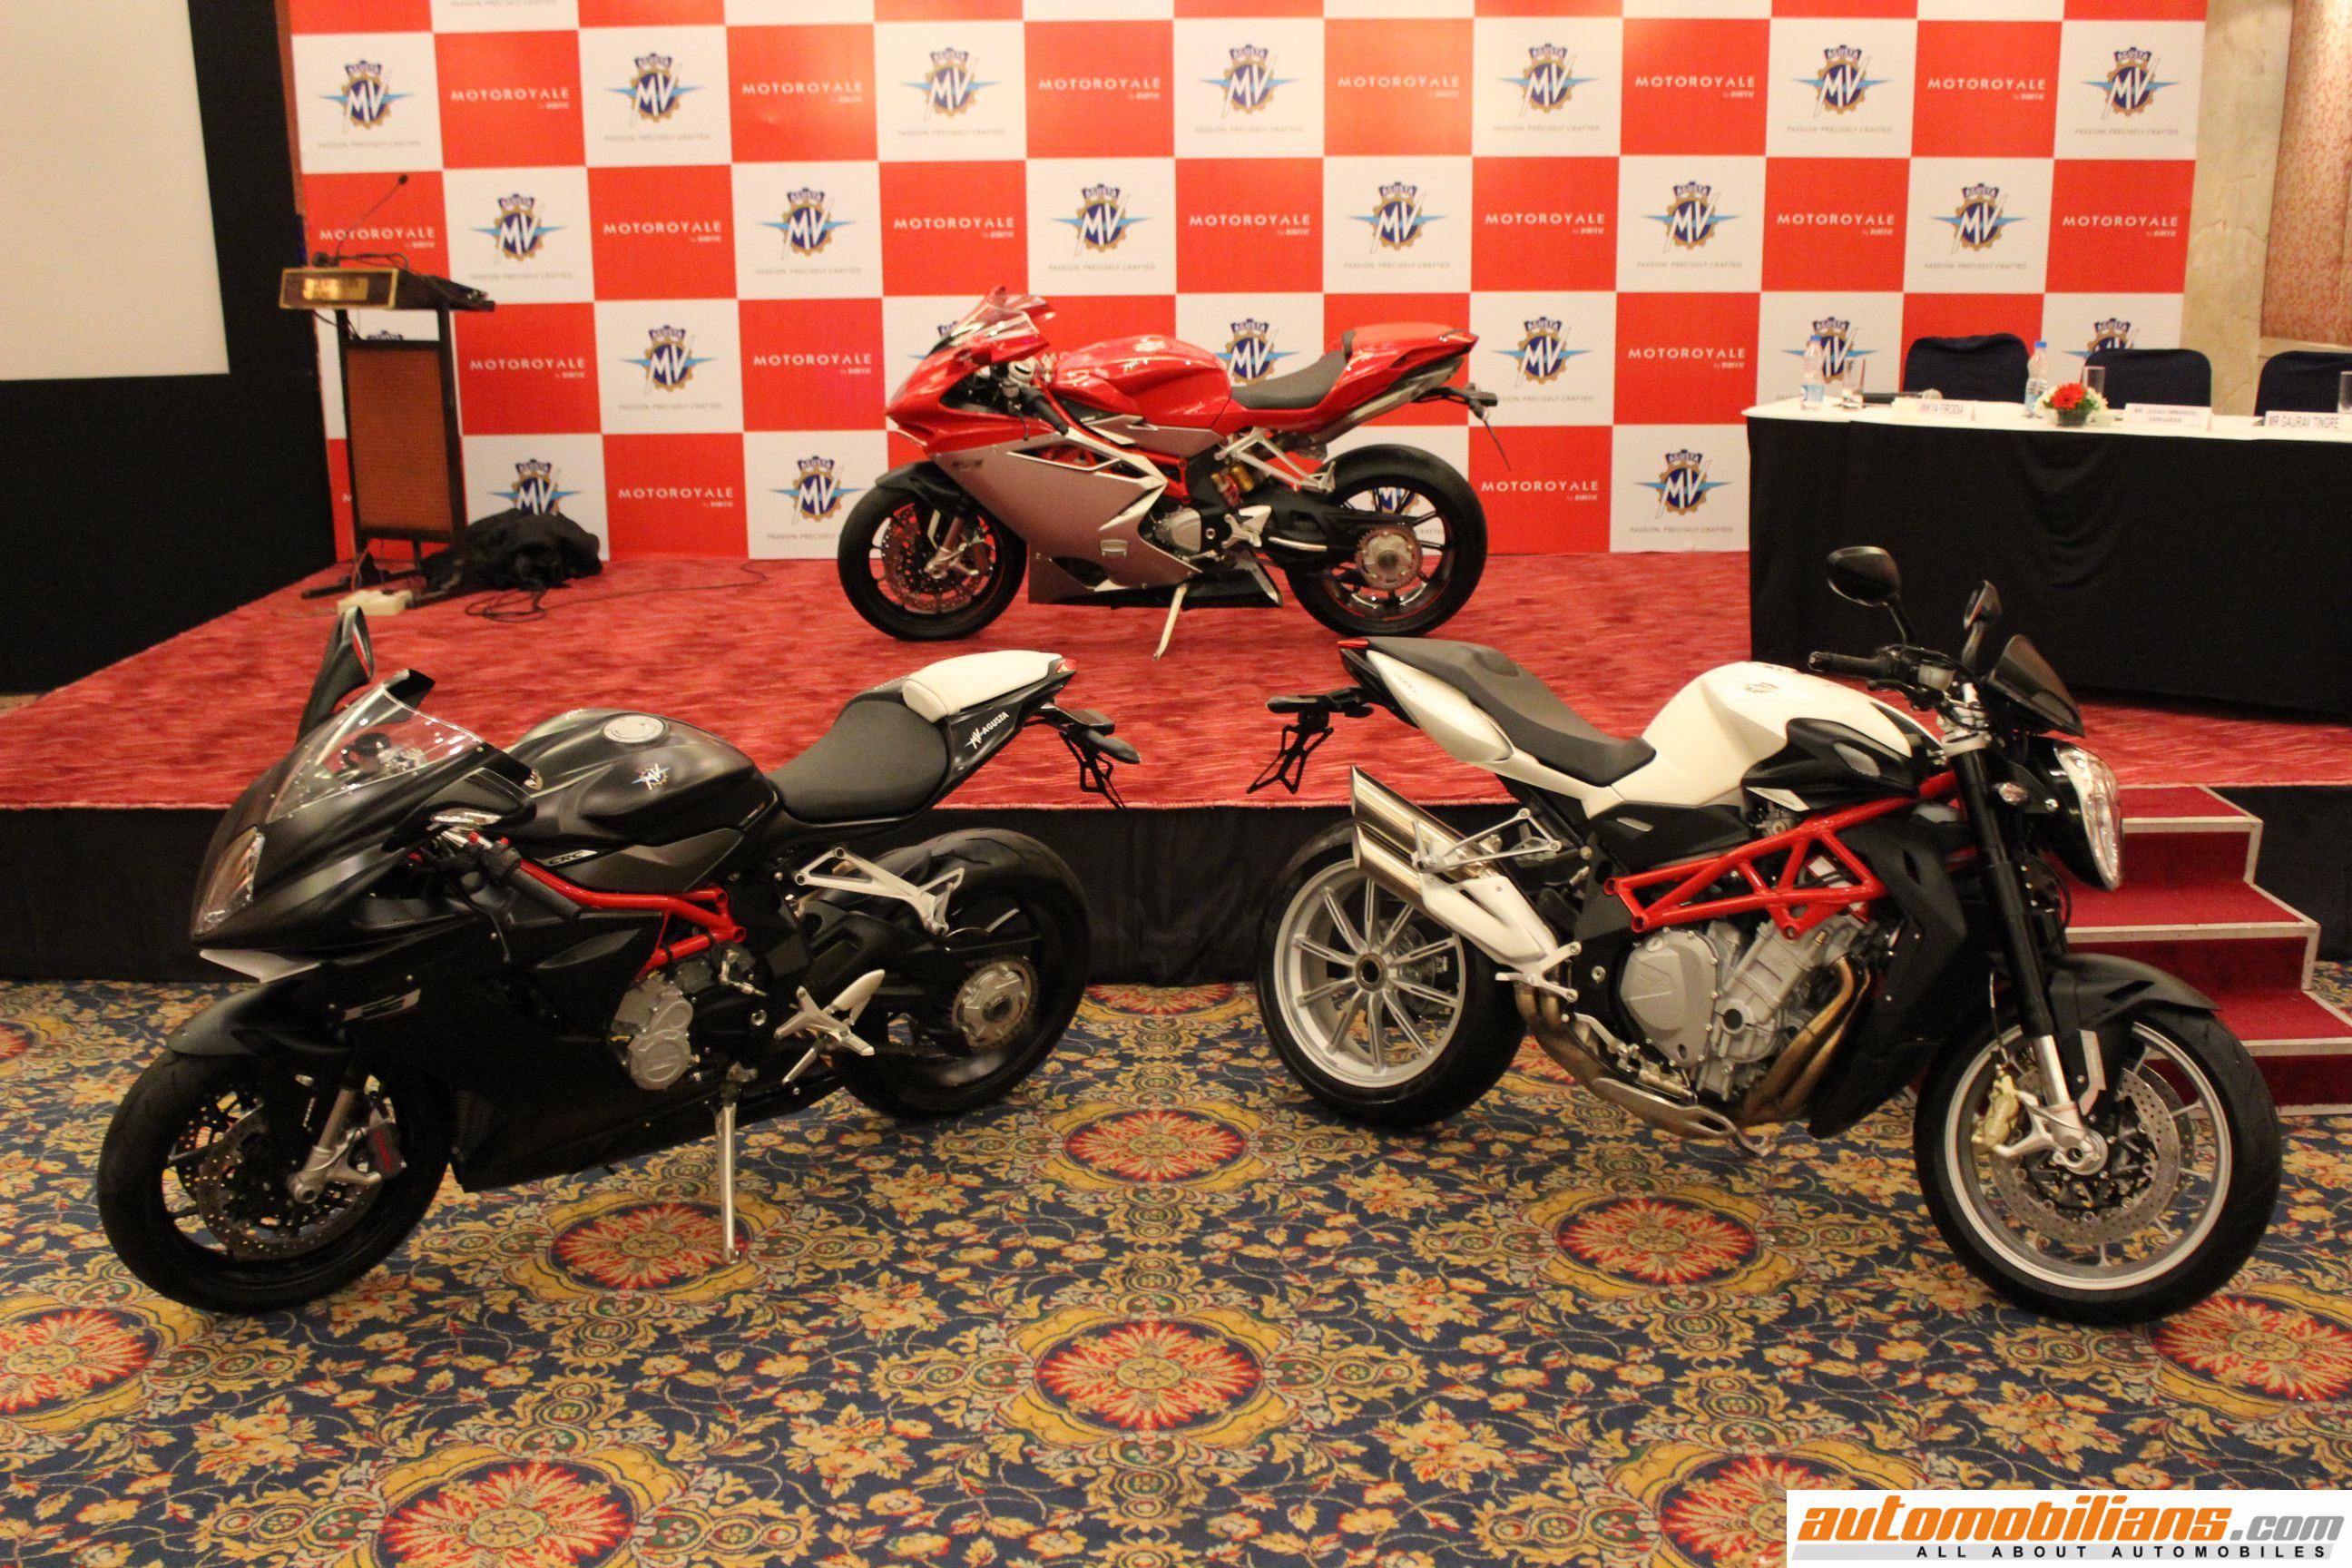 MV Agusta Premium Motorcycles Launched In India From Rs. 16.78 Lakhs (Ex-Showroom, Pune)